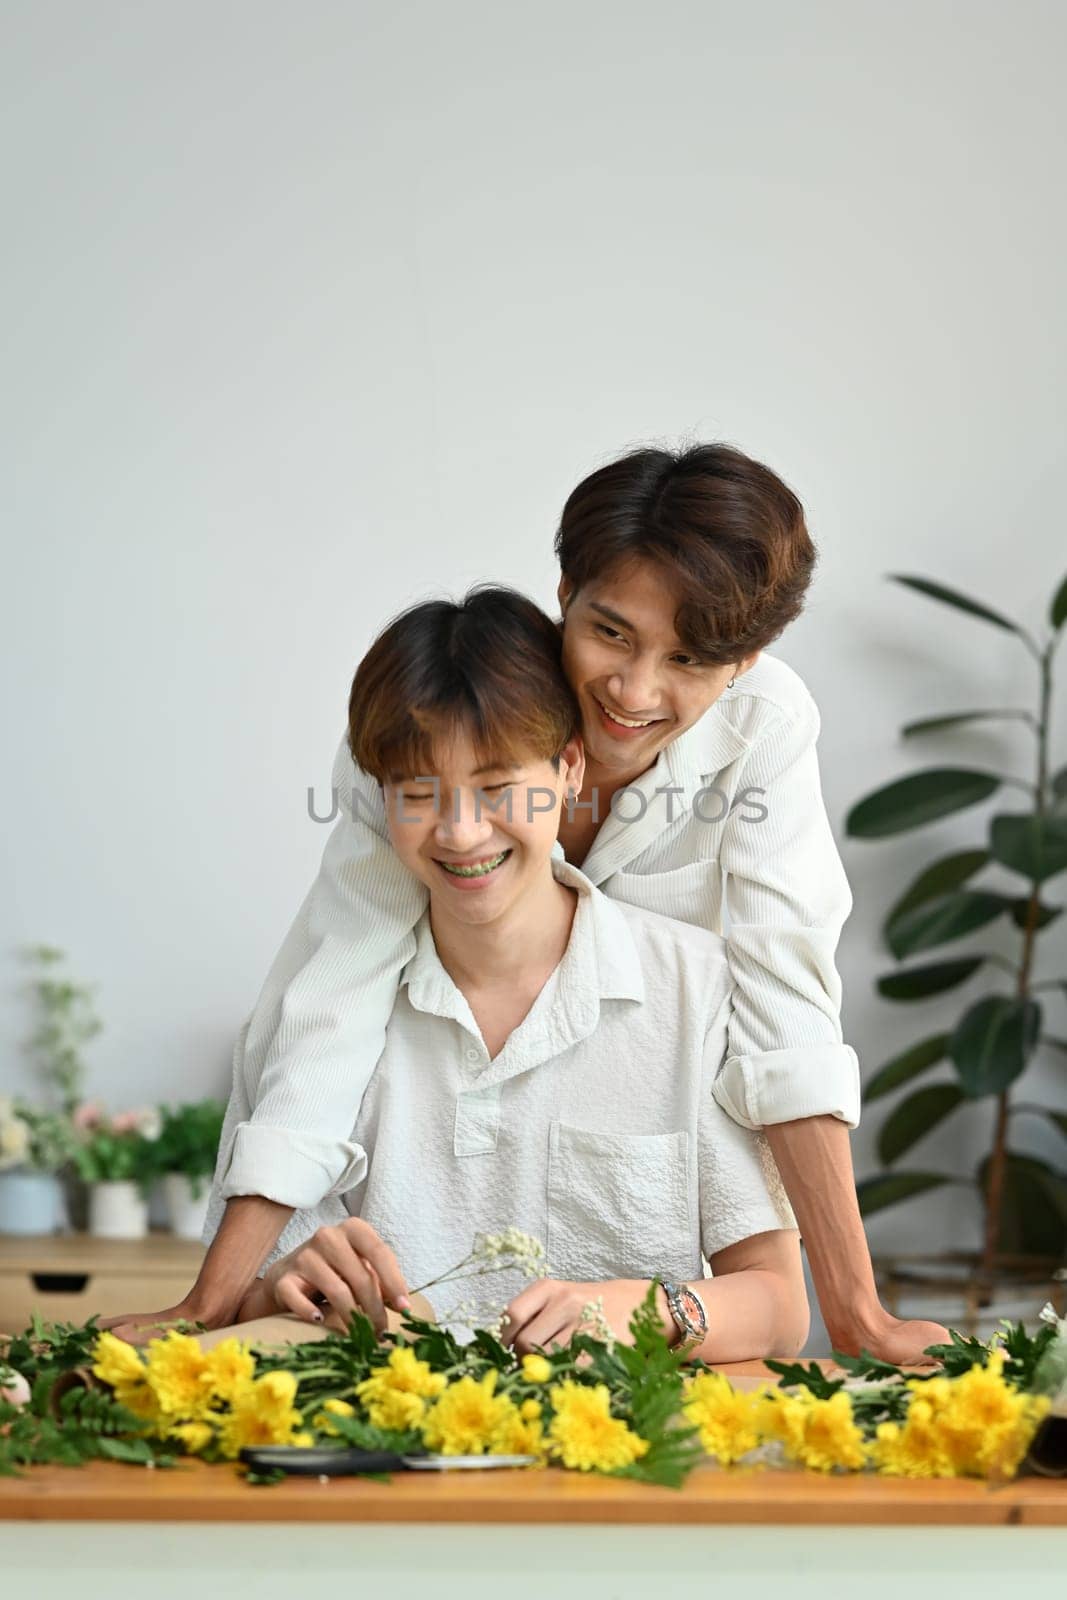 LGBT, love moments and lifestyle concept. Affectionate male gay couple spending time together, enjoying arranging flowers in cozy home by prathanchorruangsak